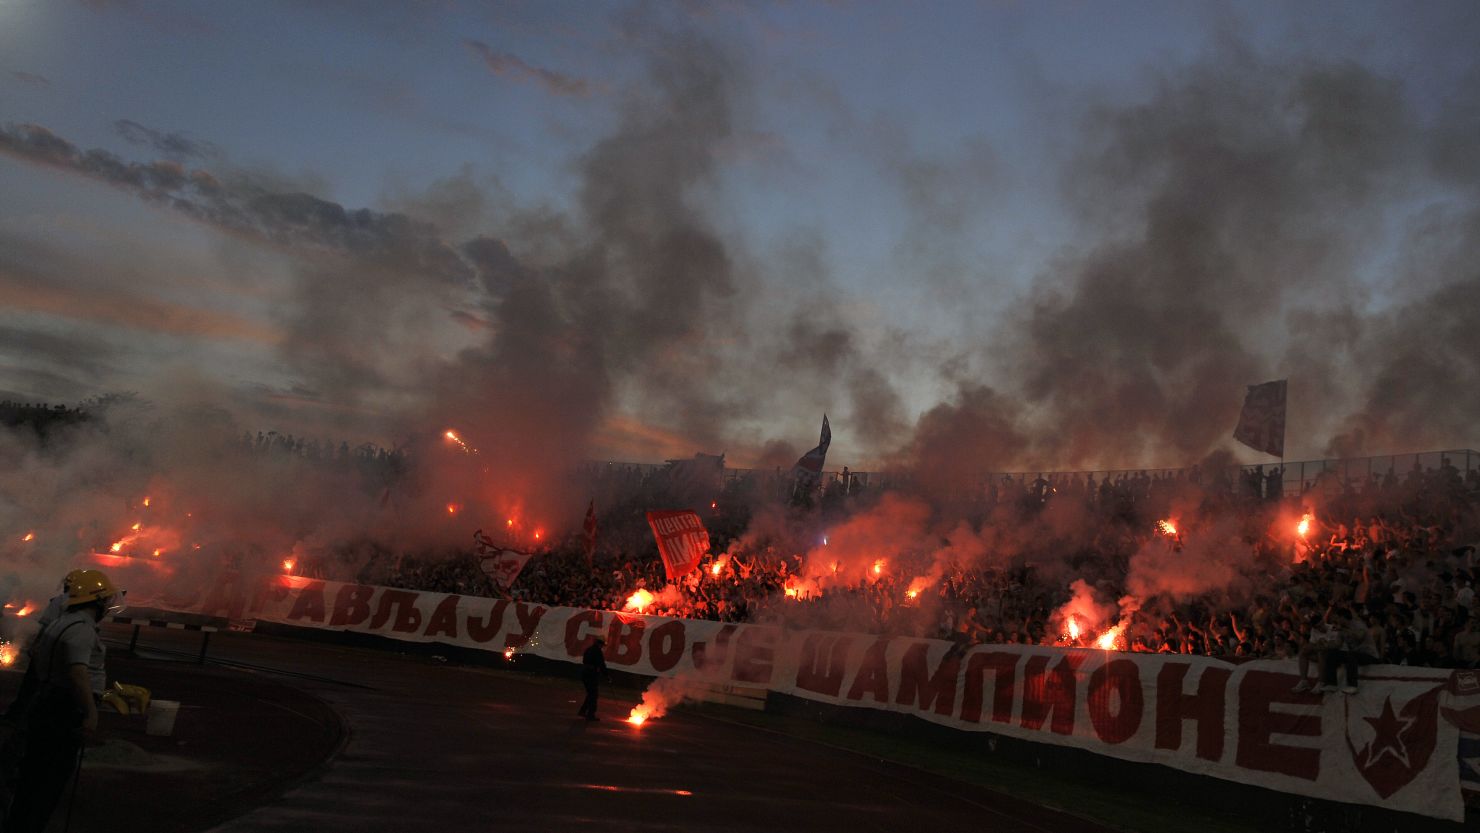 Fans of Red Star Belgrade light flares in support of their team but could they miss out on the 2014/15 Champions League?